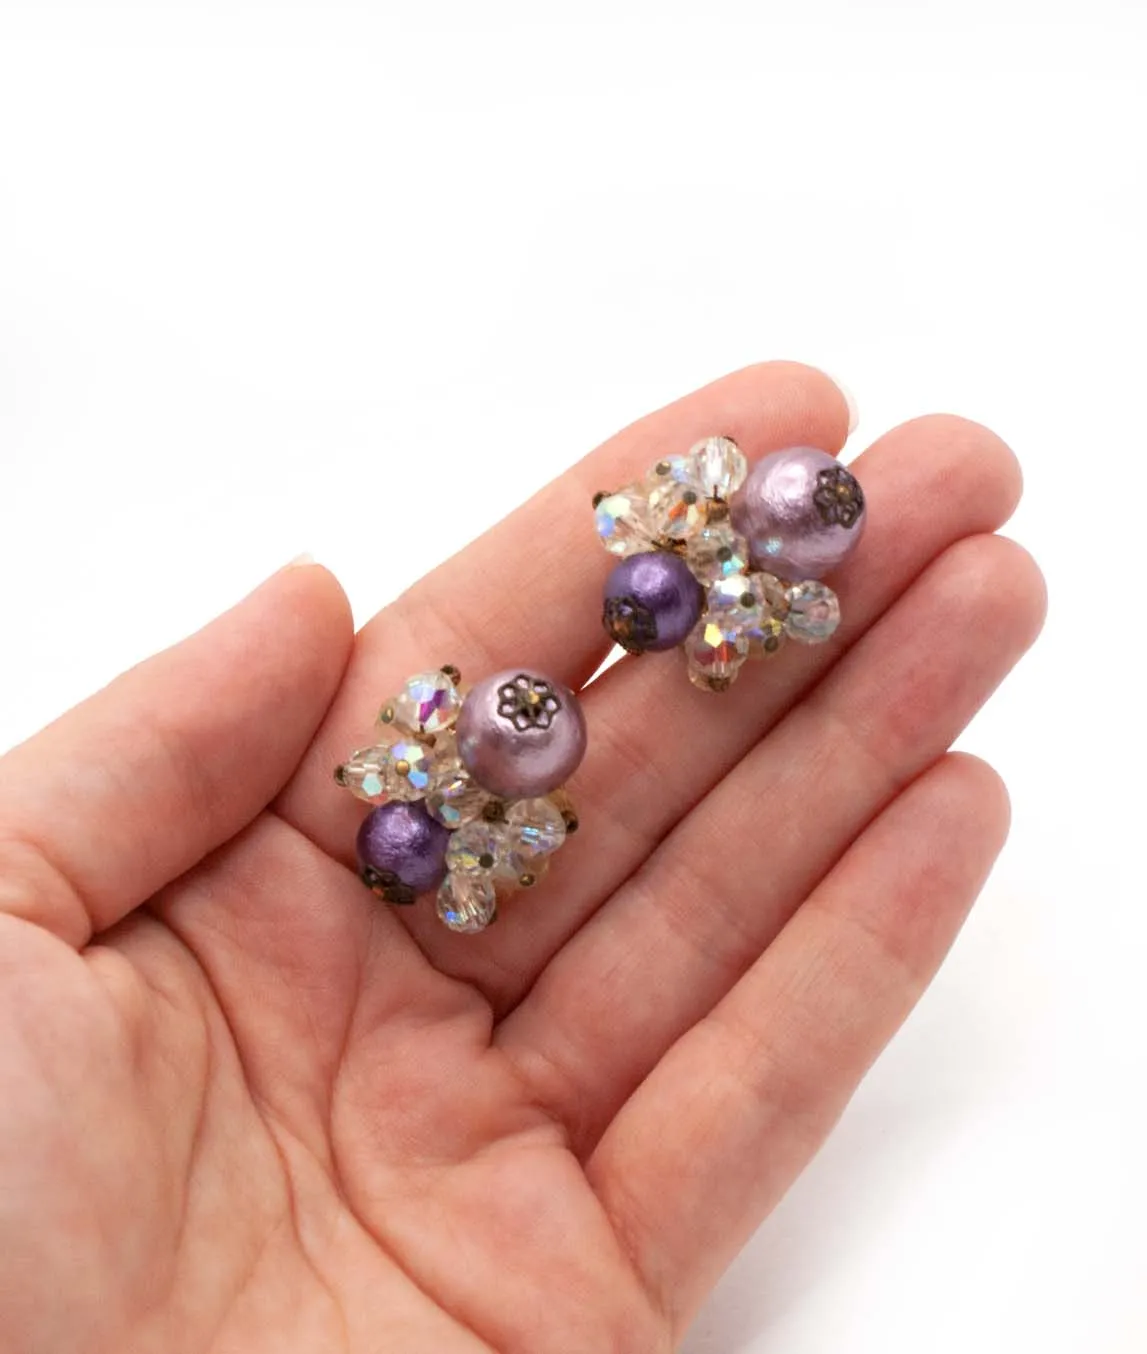 Vendôme purple bead and clear crystal cluster earrings held in a hand